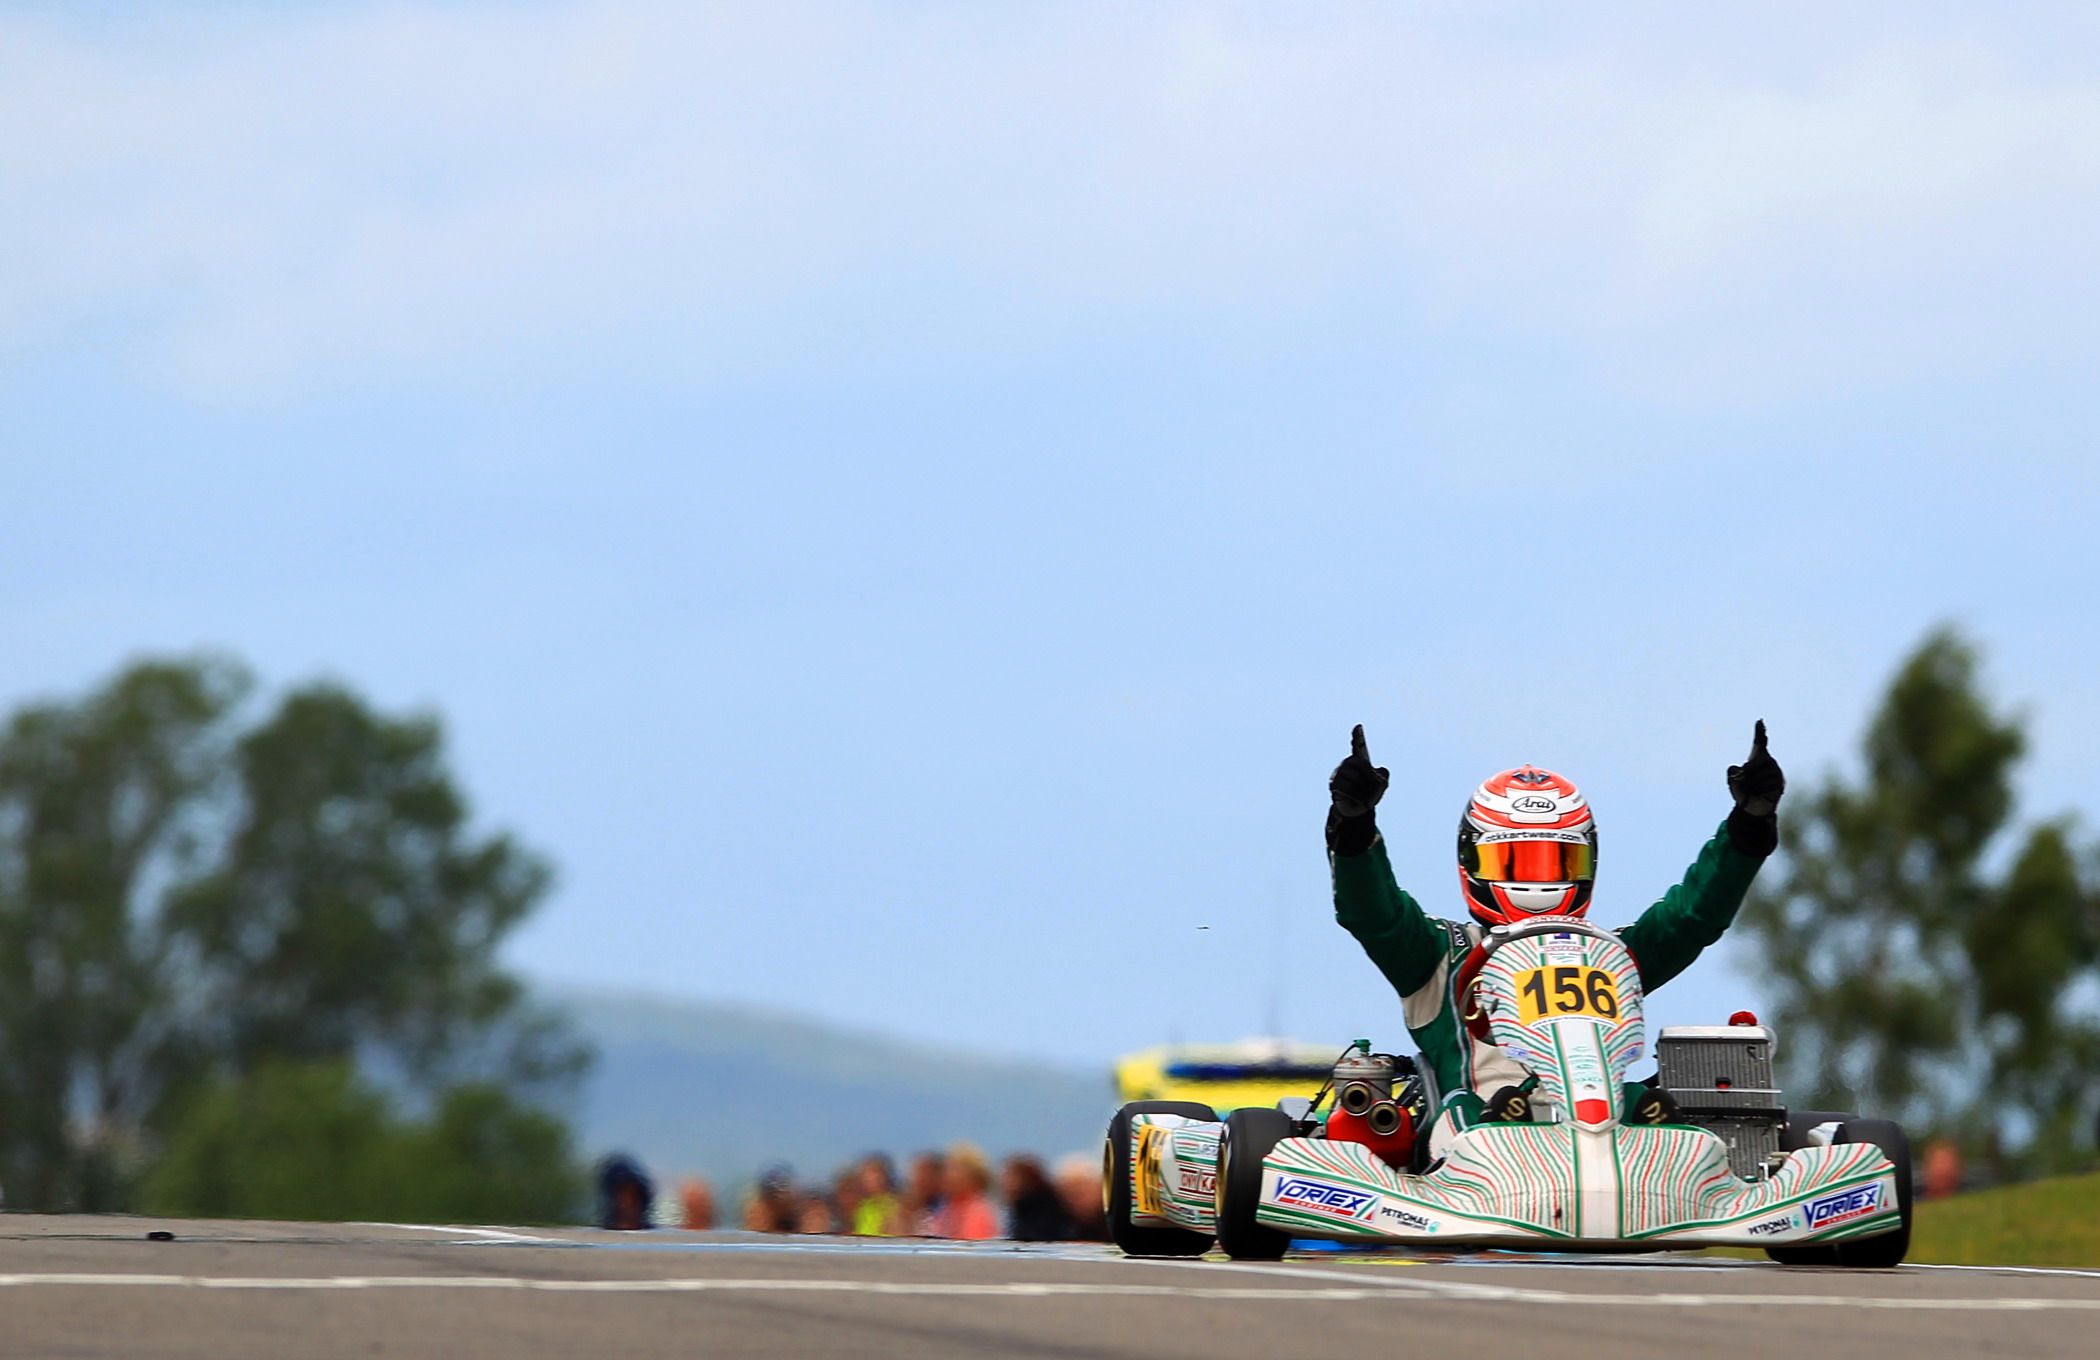 Armstrong amped for CIK-FIA World Karting Champs this weekend